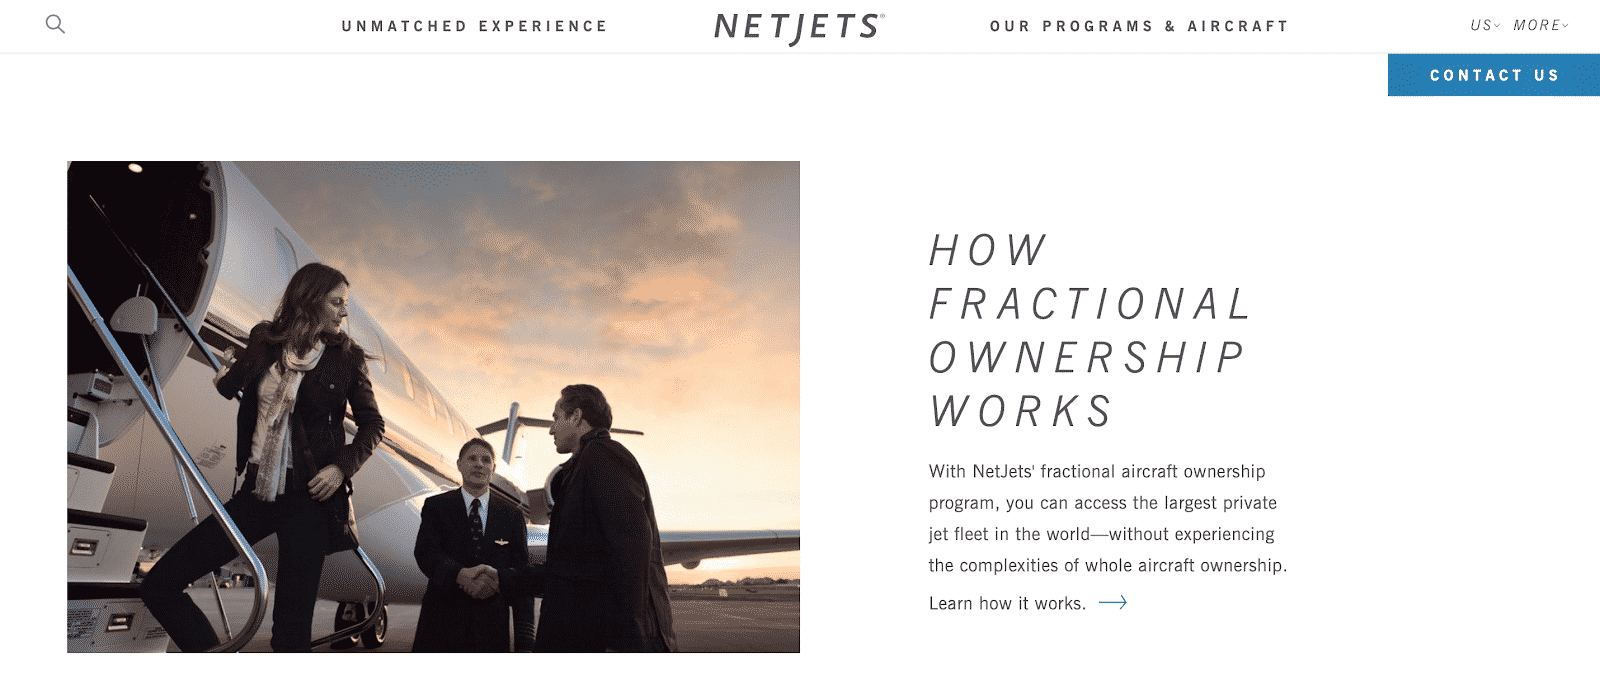 The Netjets homepage